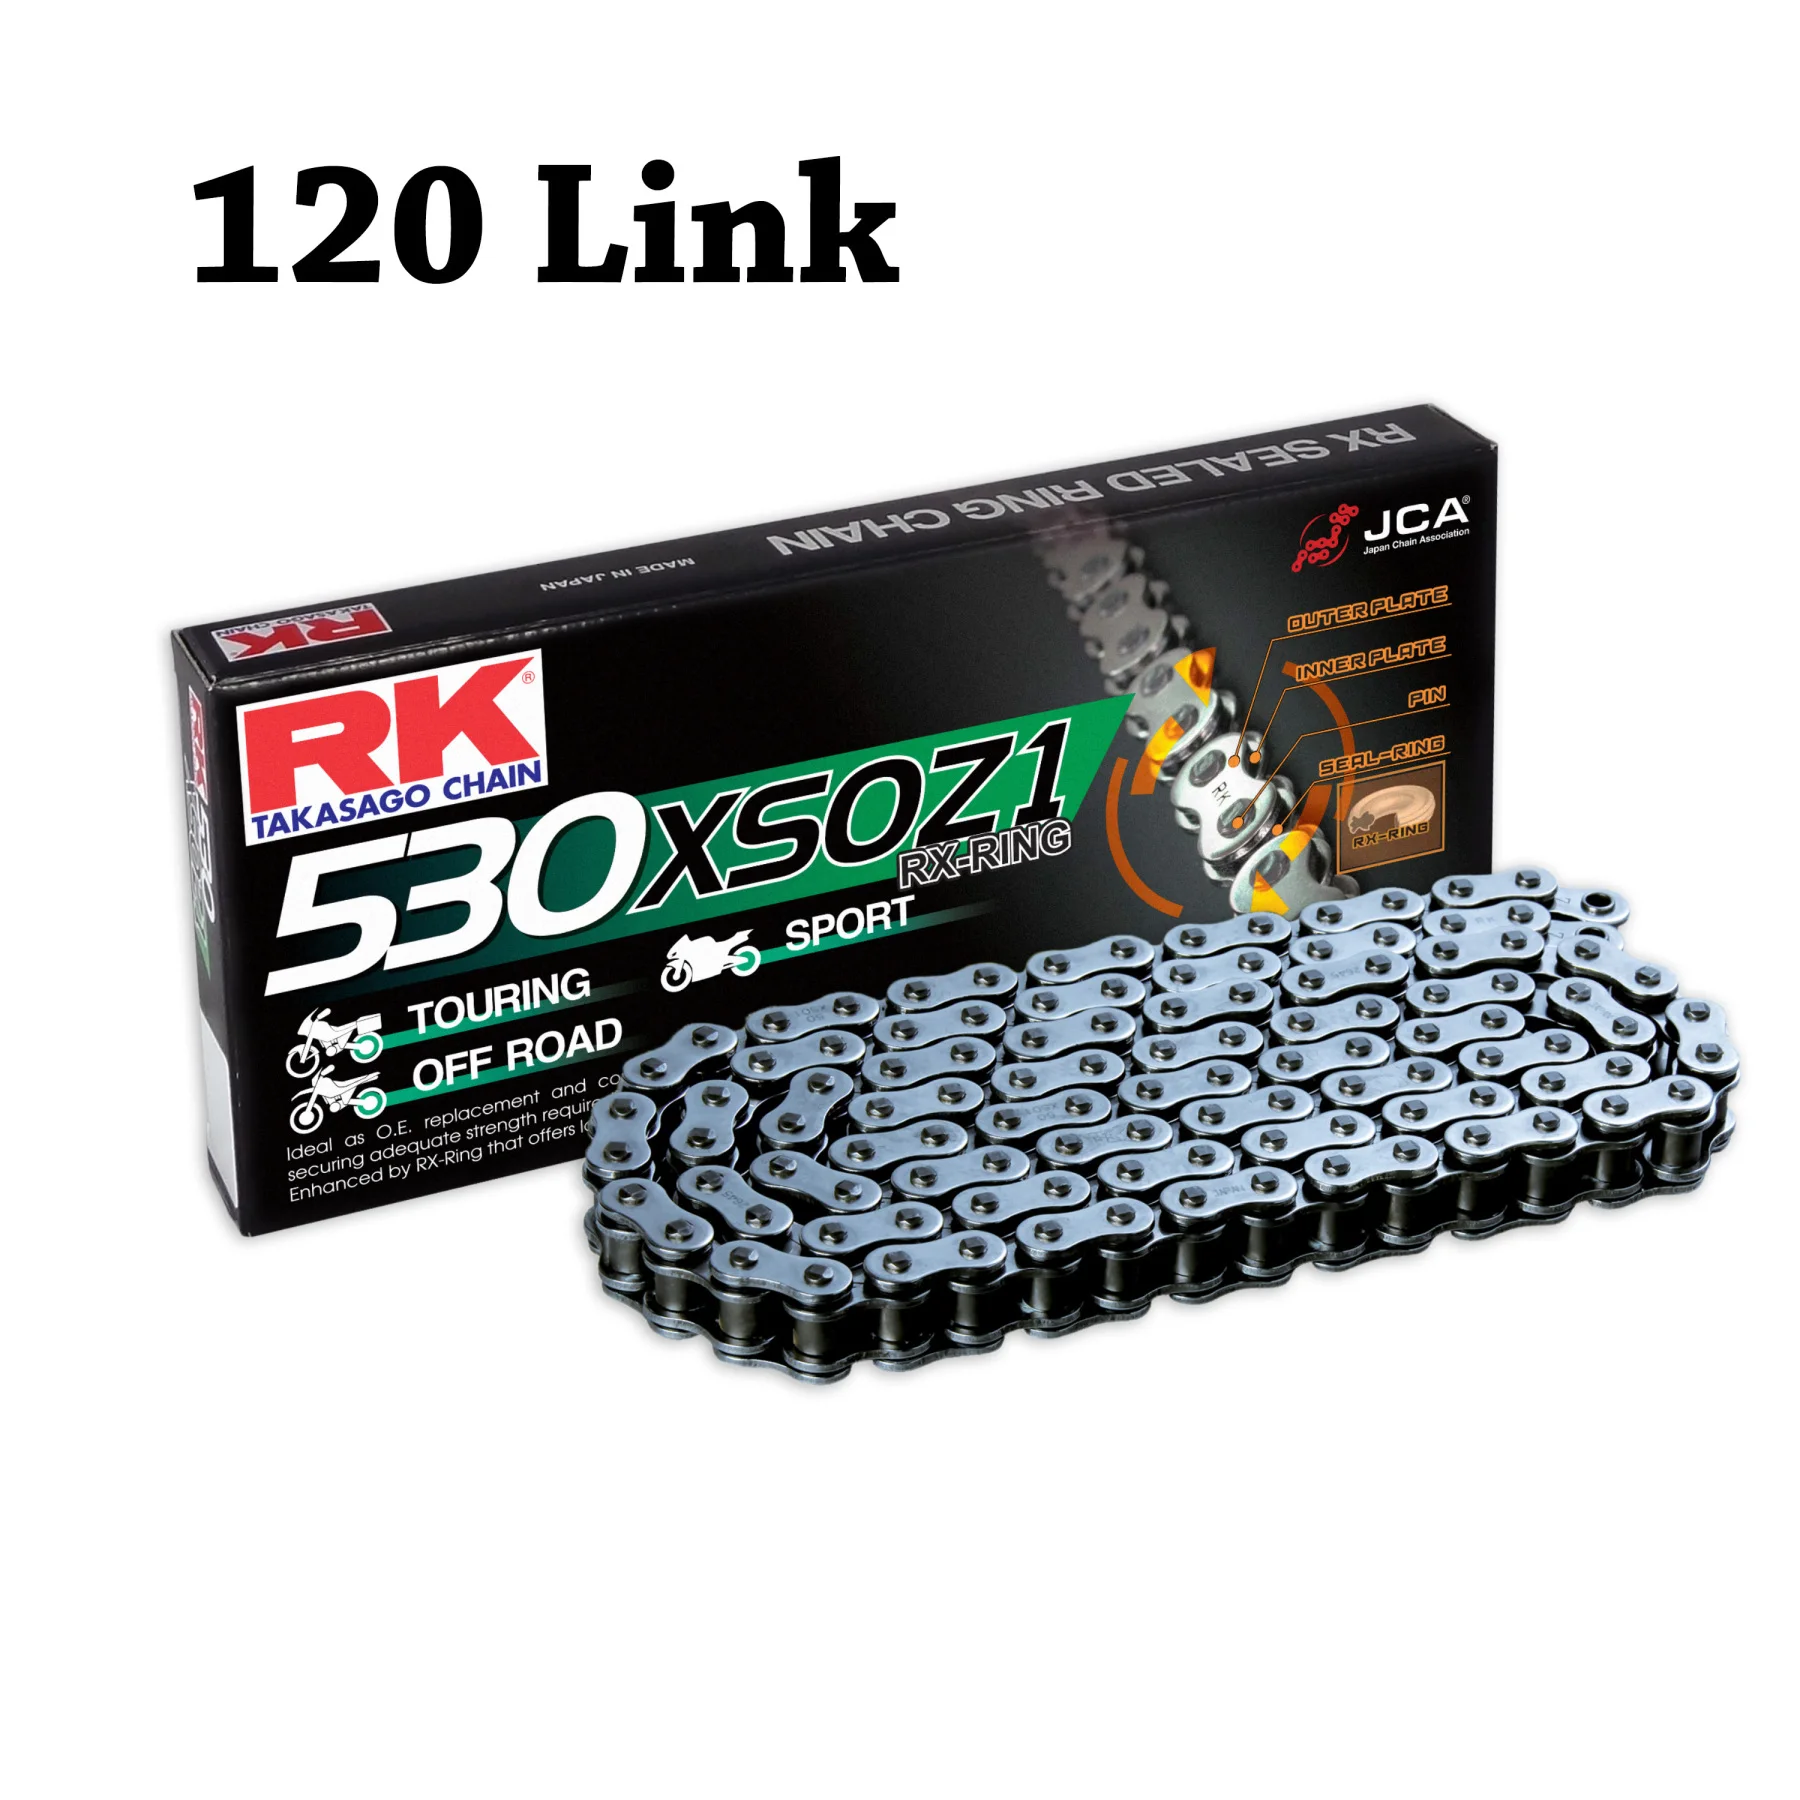 

RK Motorcycle Chain X-Ring 530 XSO 120L for Ducati 600-696-750-900-1200 Monster/Supersport/GT/ST/Multistrada/Streetfighter/Senna